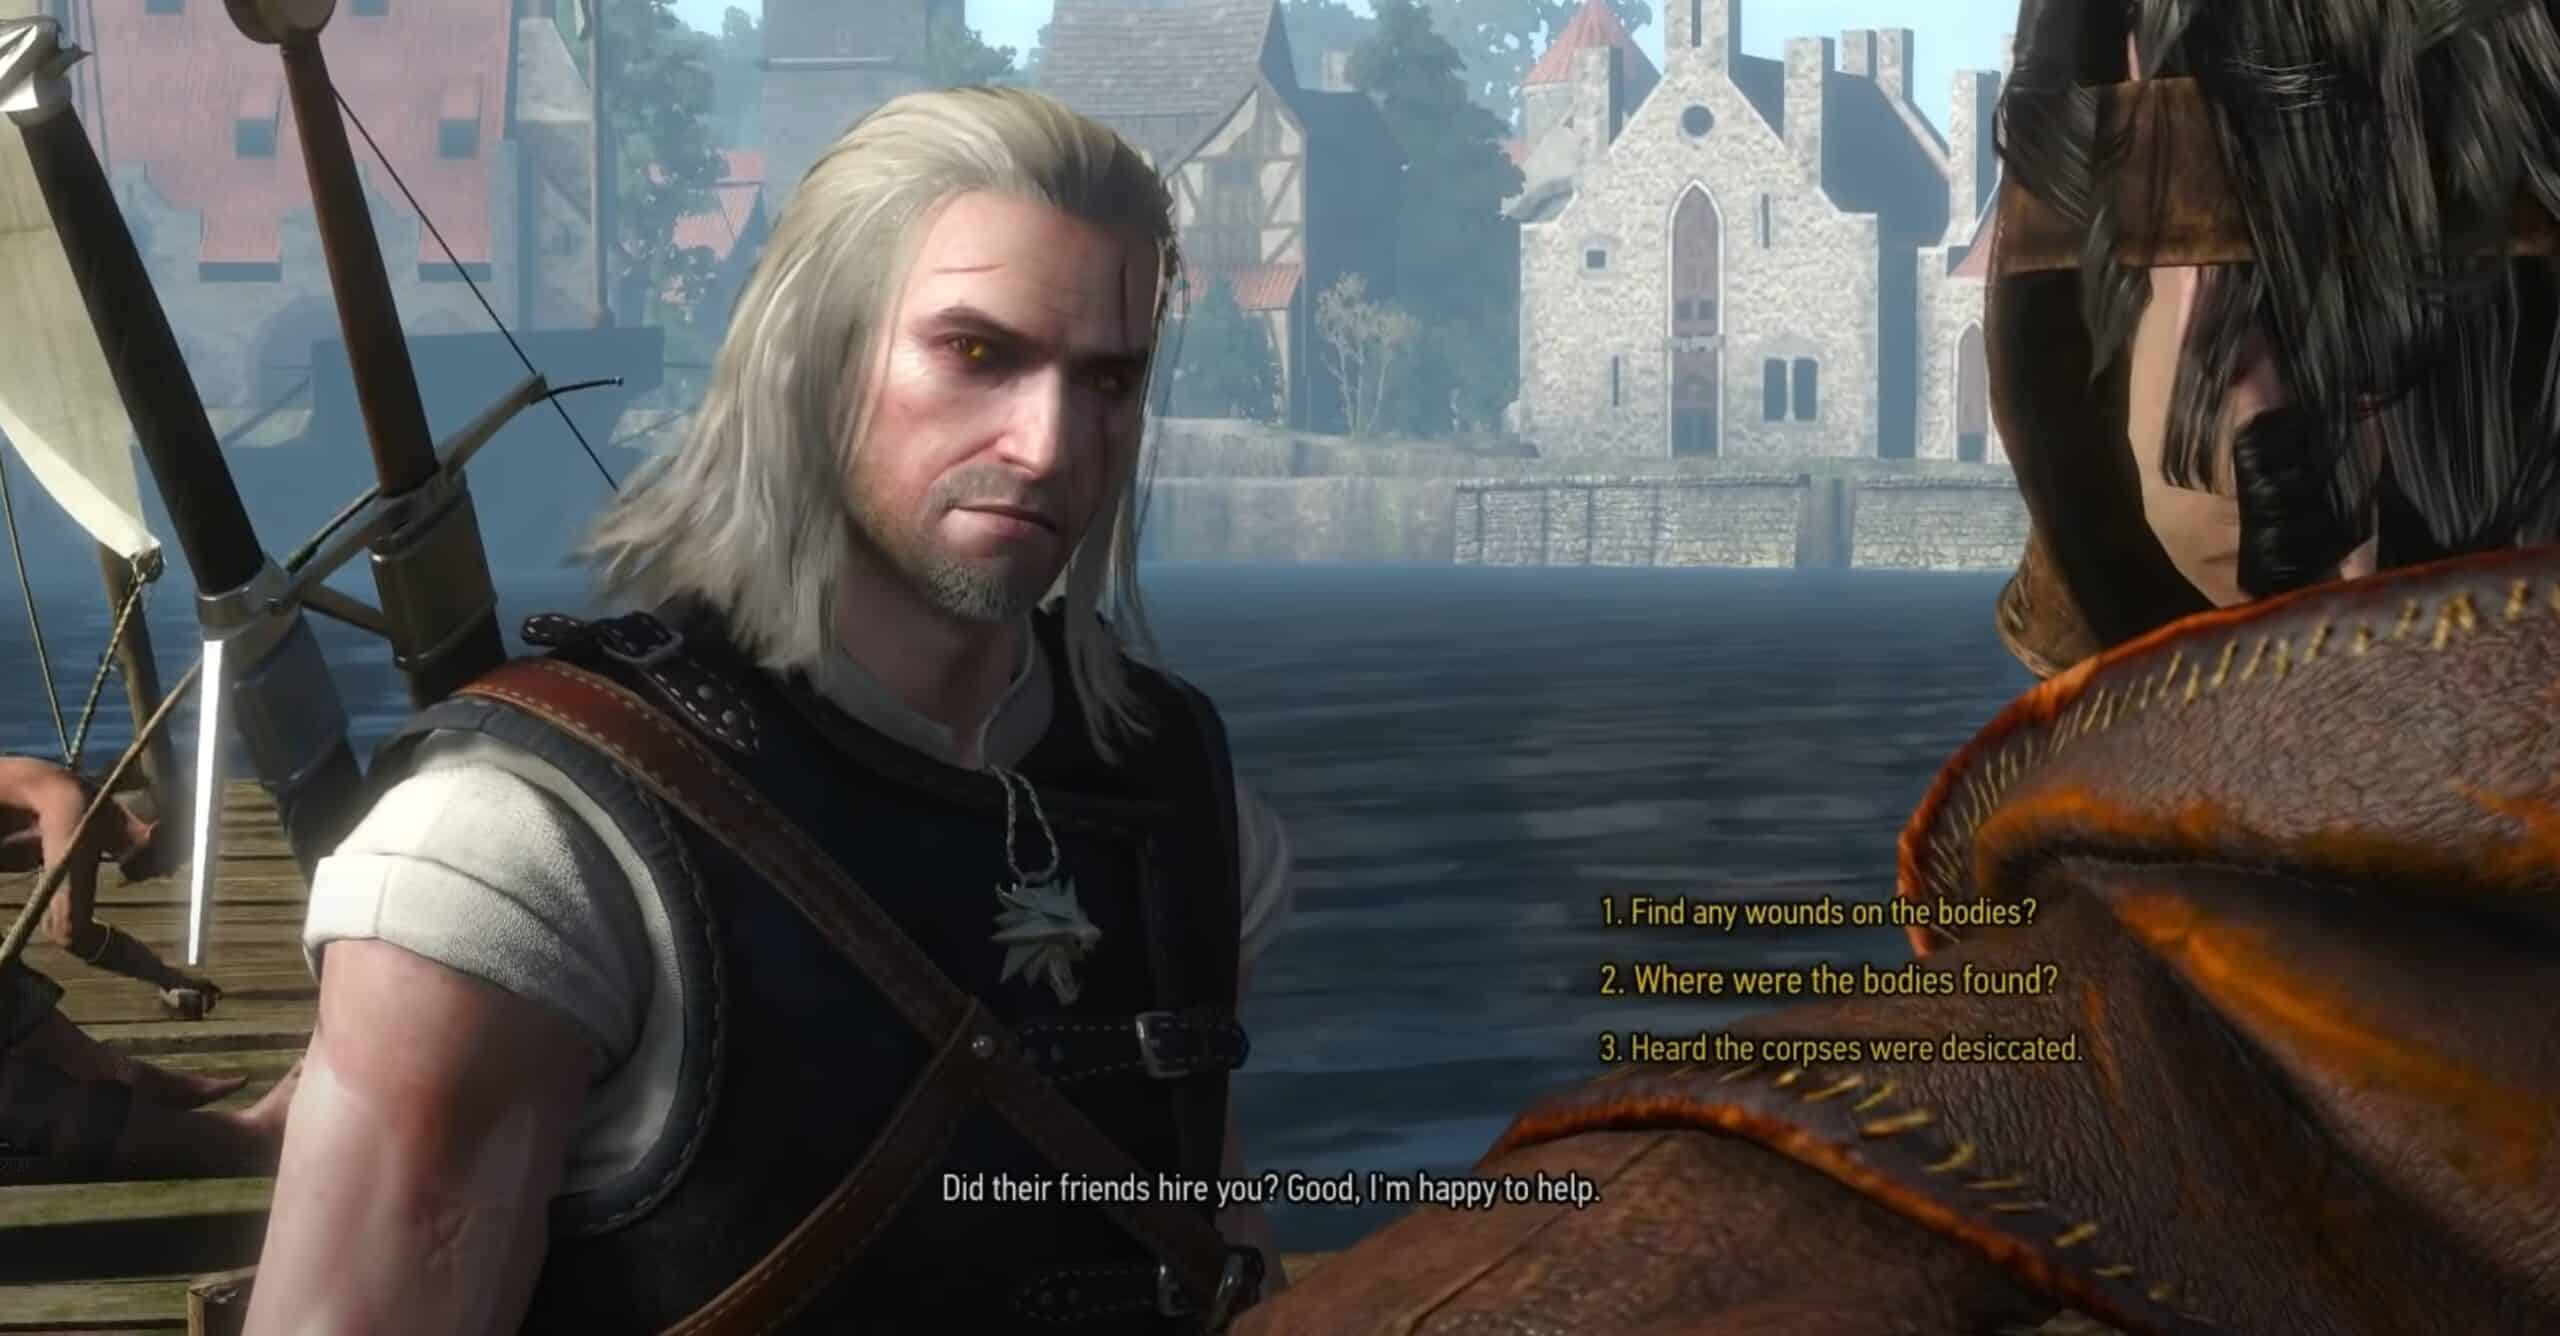 The Witcher 3 Contract: Deadly Delights